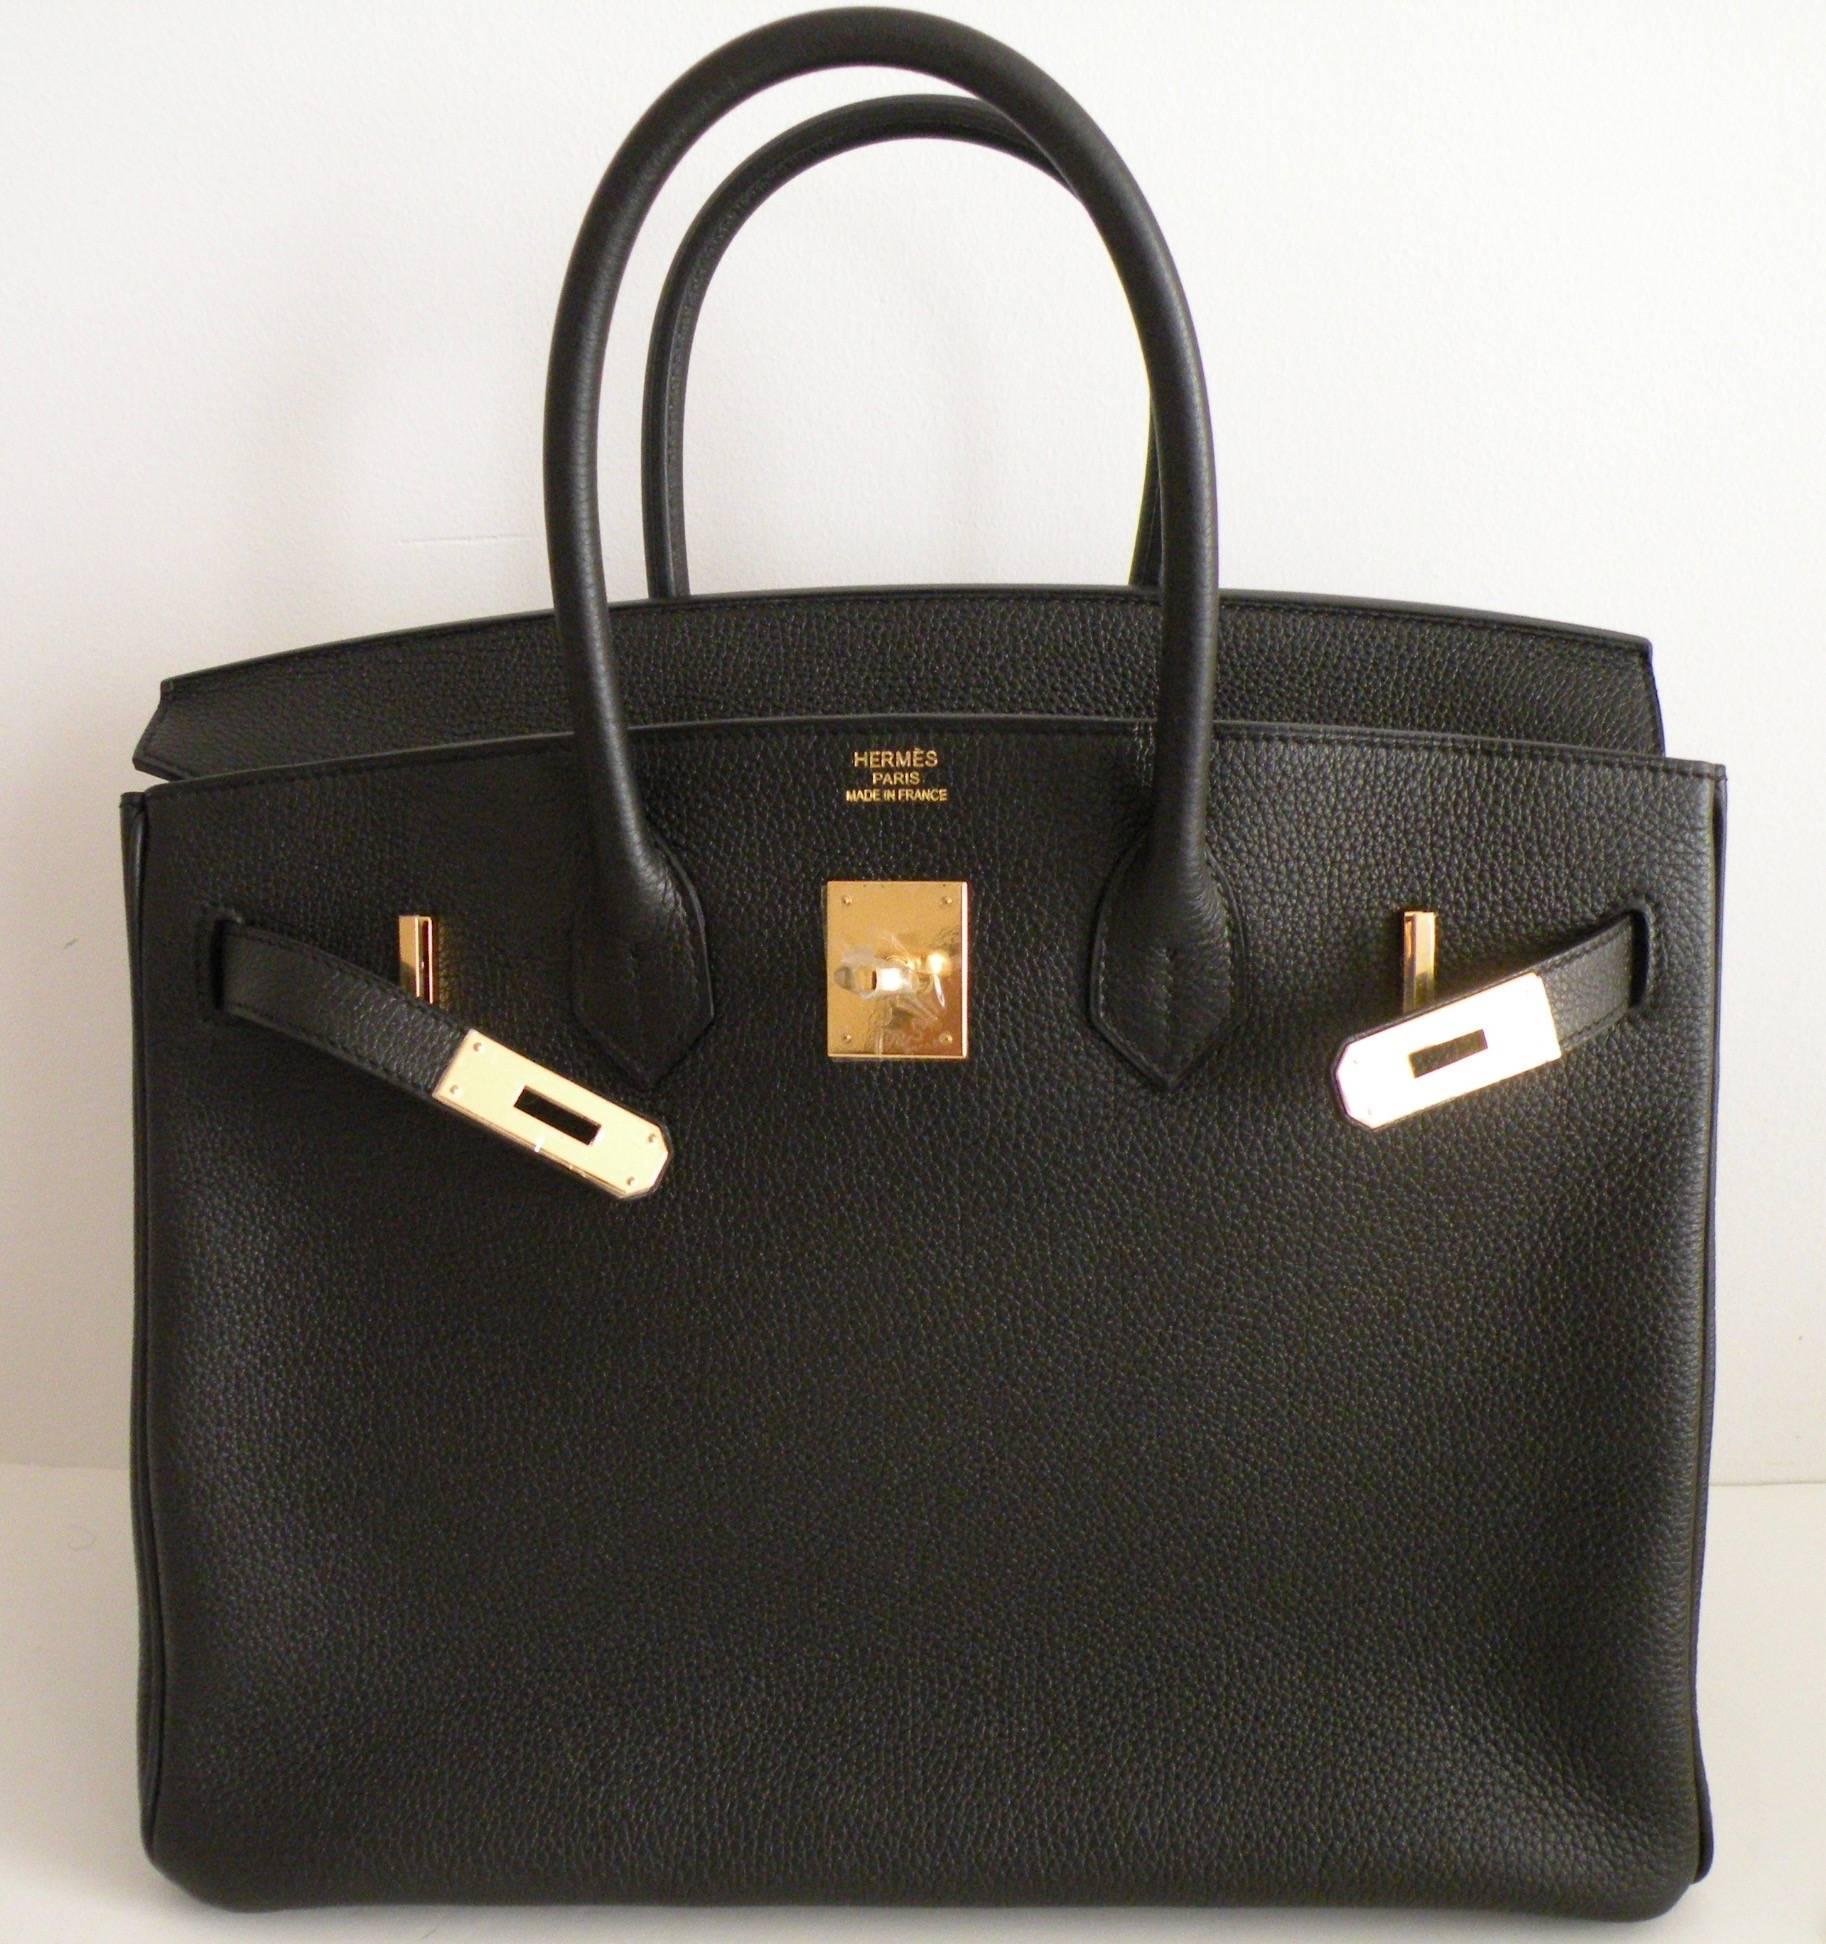 Hermès
35cm Birkin Bag
Black Togo Leather with Gold, probably the most sought after combination in a Birkin. So elegant. Day or Evening
Color: Black
Leather: Togo, a pebbled leather
Hardware: Gold
Lined in Chevre
Brand New never carried
A stamo 2017